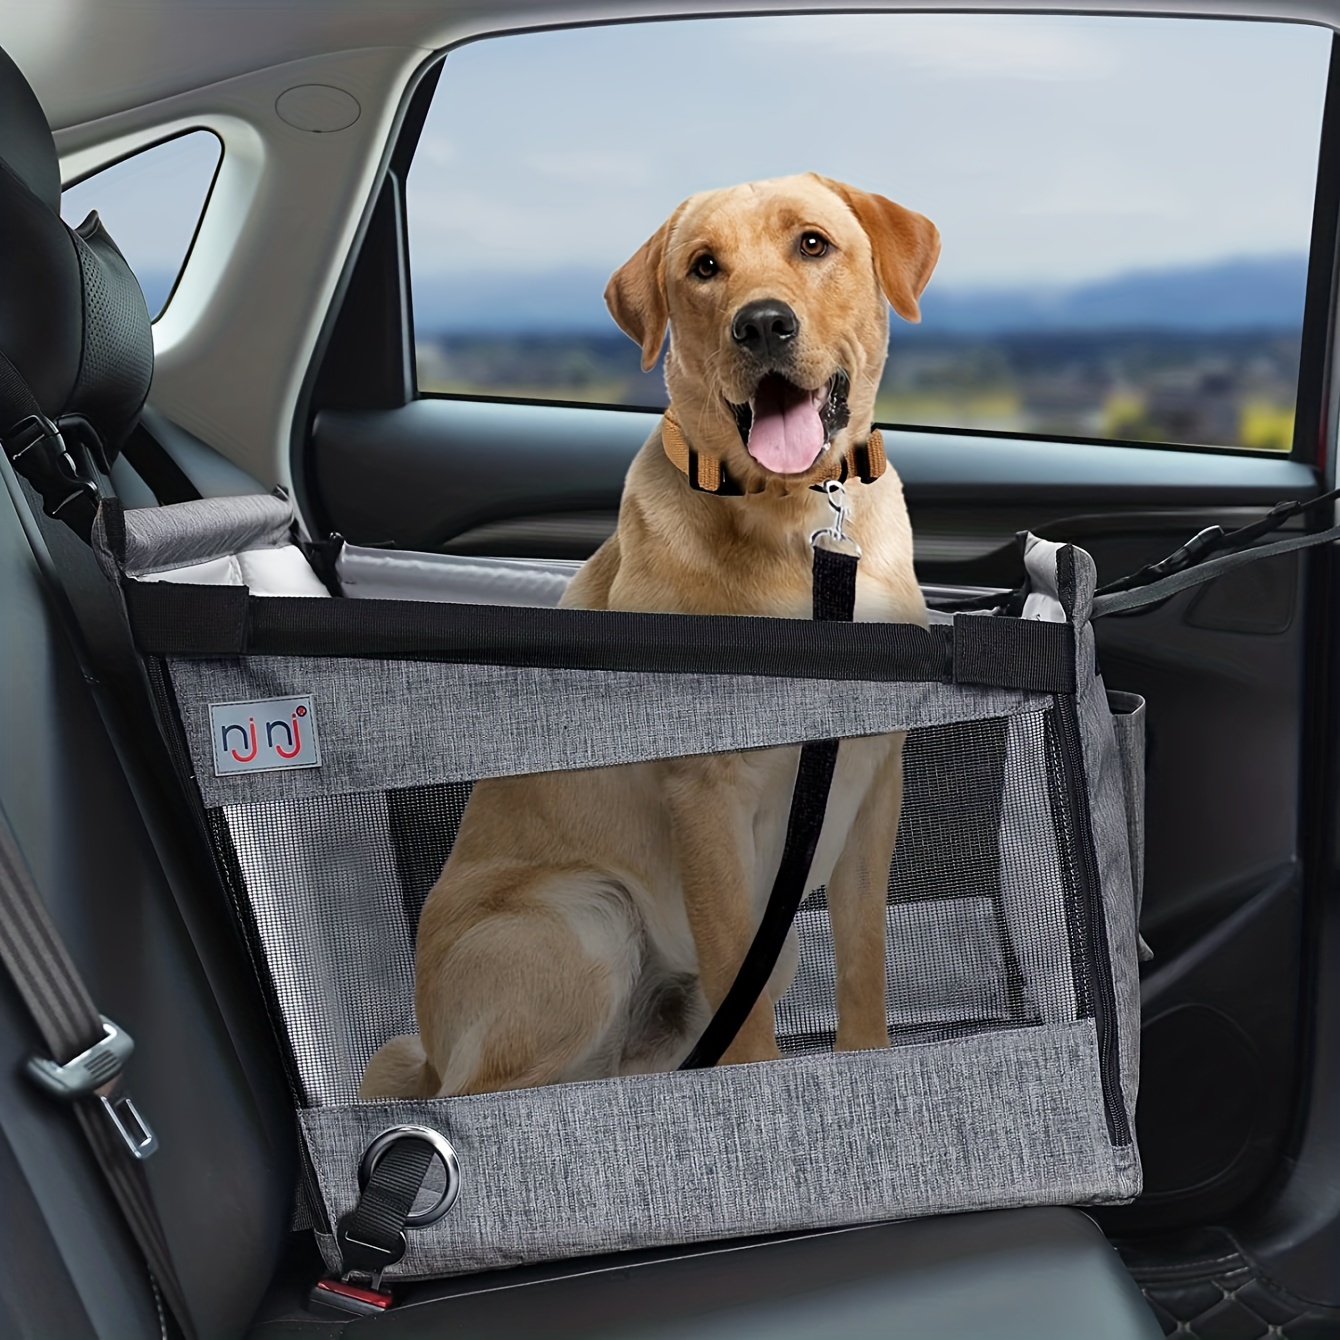 Stable And Waterproof Dog Car Seat For Small To Medium-sized Dogs